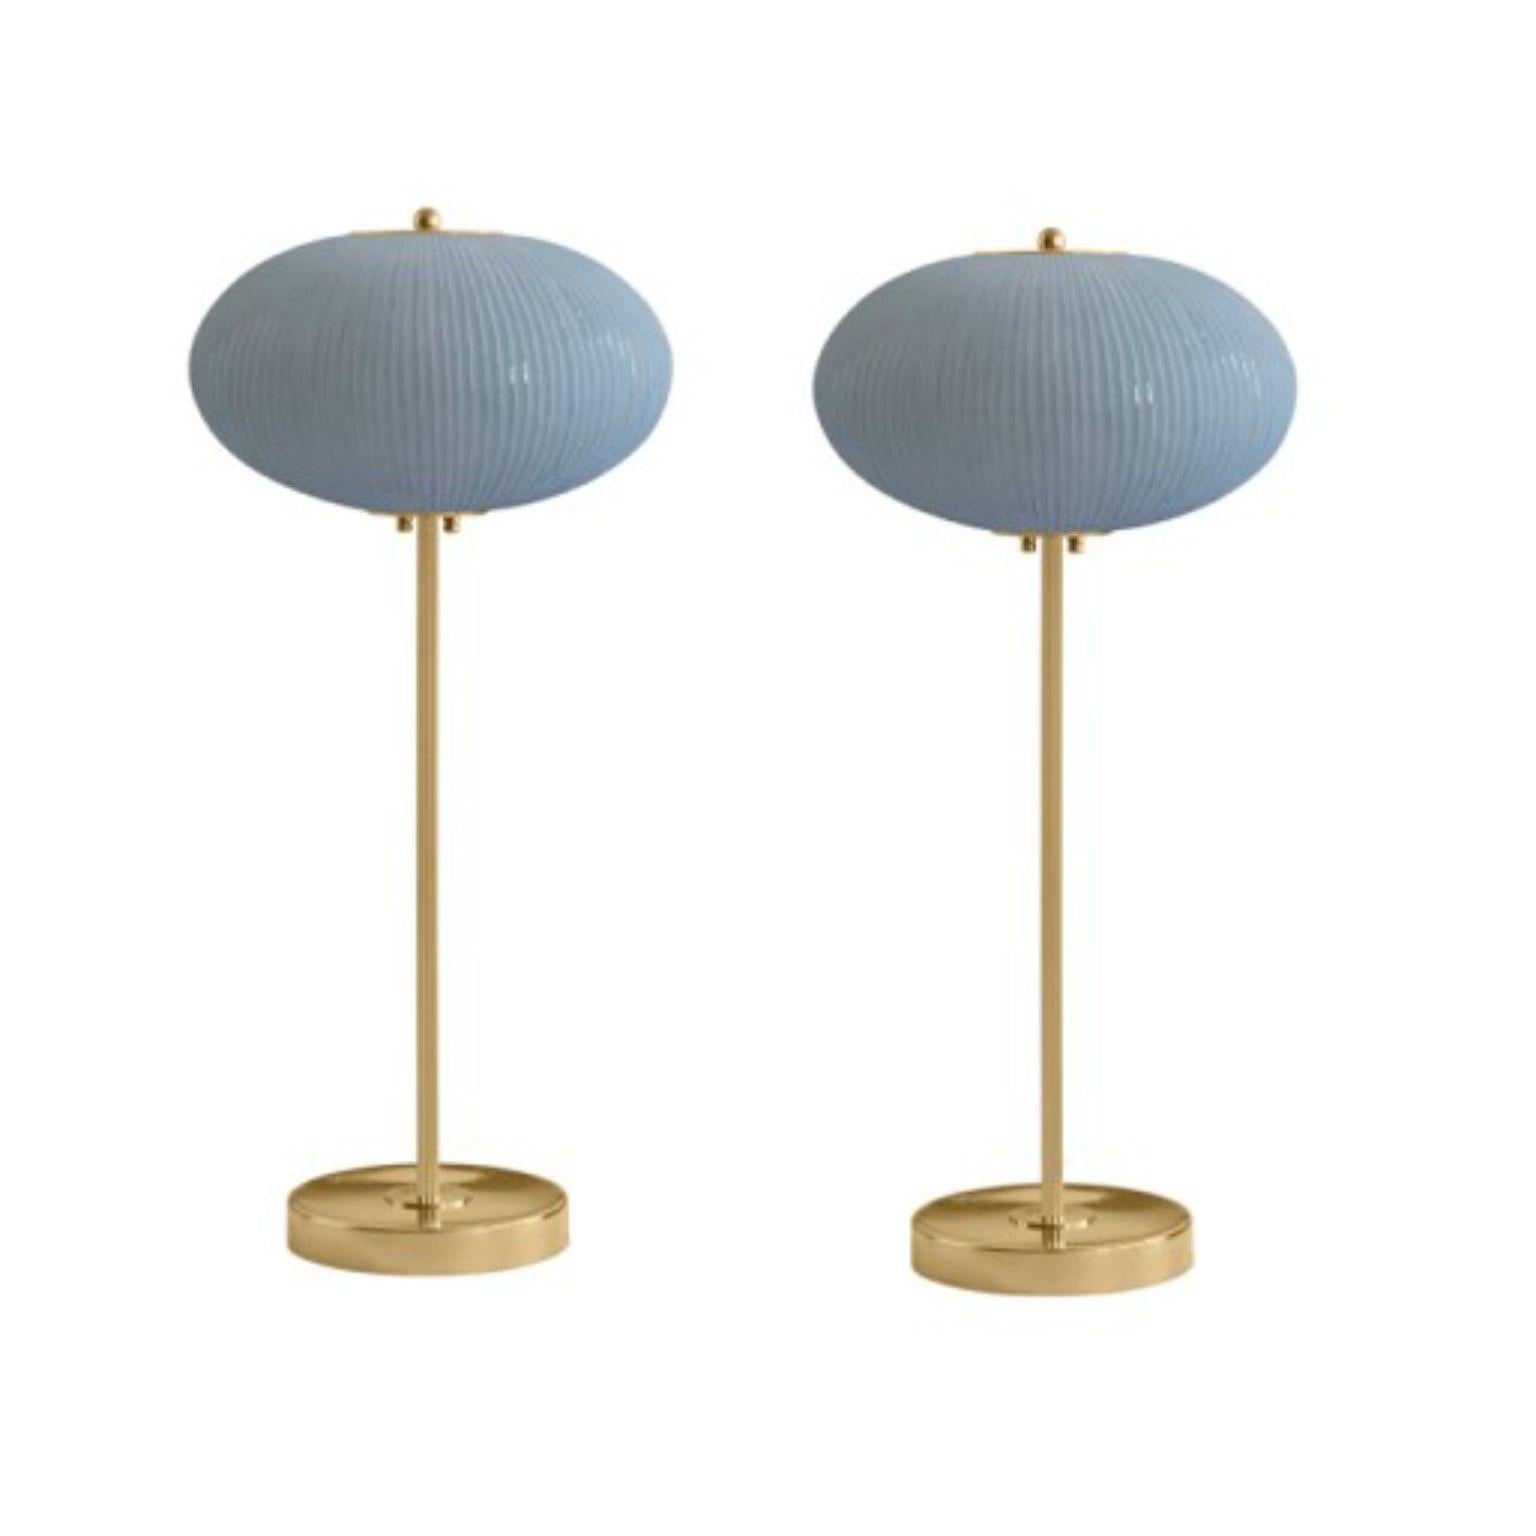 Table lamp China 07 by Magic Circus Editions
Dimensions: H 70 x W 32 x D 32 cm
Materials: Brass, mouth blown glass sculpted with a diamond saw
Colour: opal grey

Available finishes: Brass, nickel
Available colours: enamel soft white, soft rose, jade